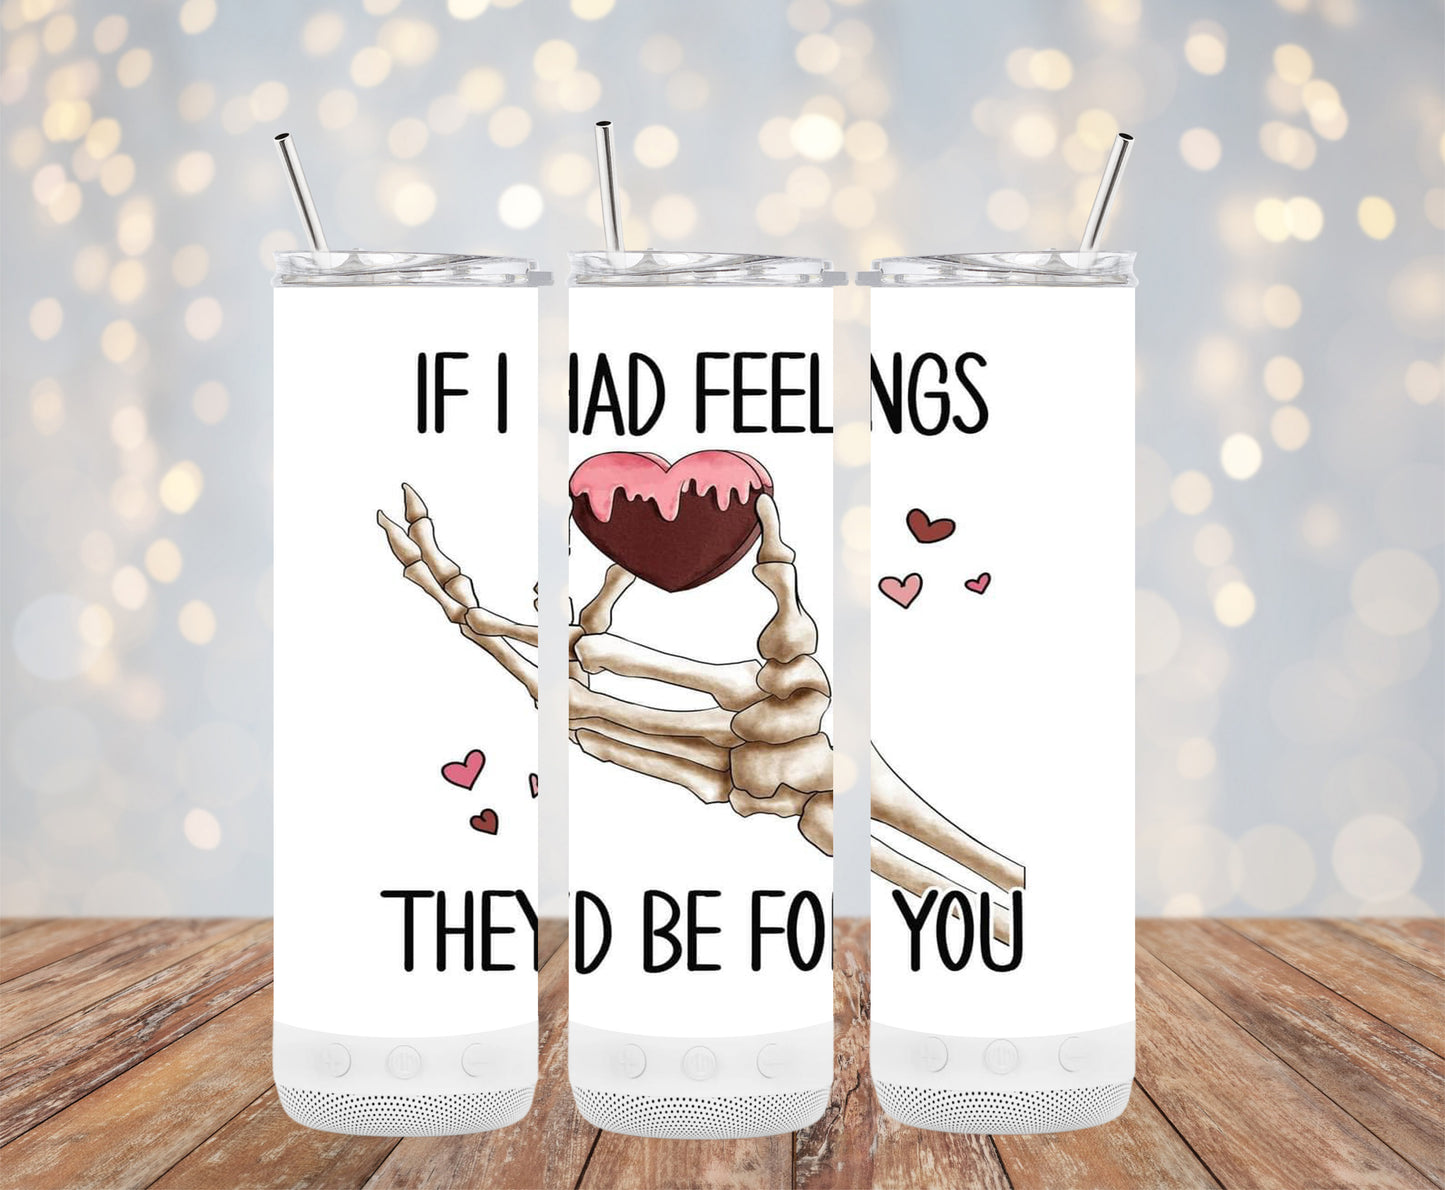 If I had feelings they'd be for You (Valentine Tumbler)